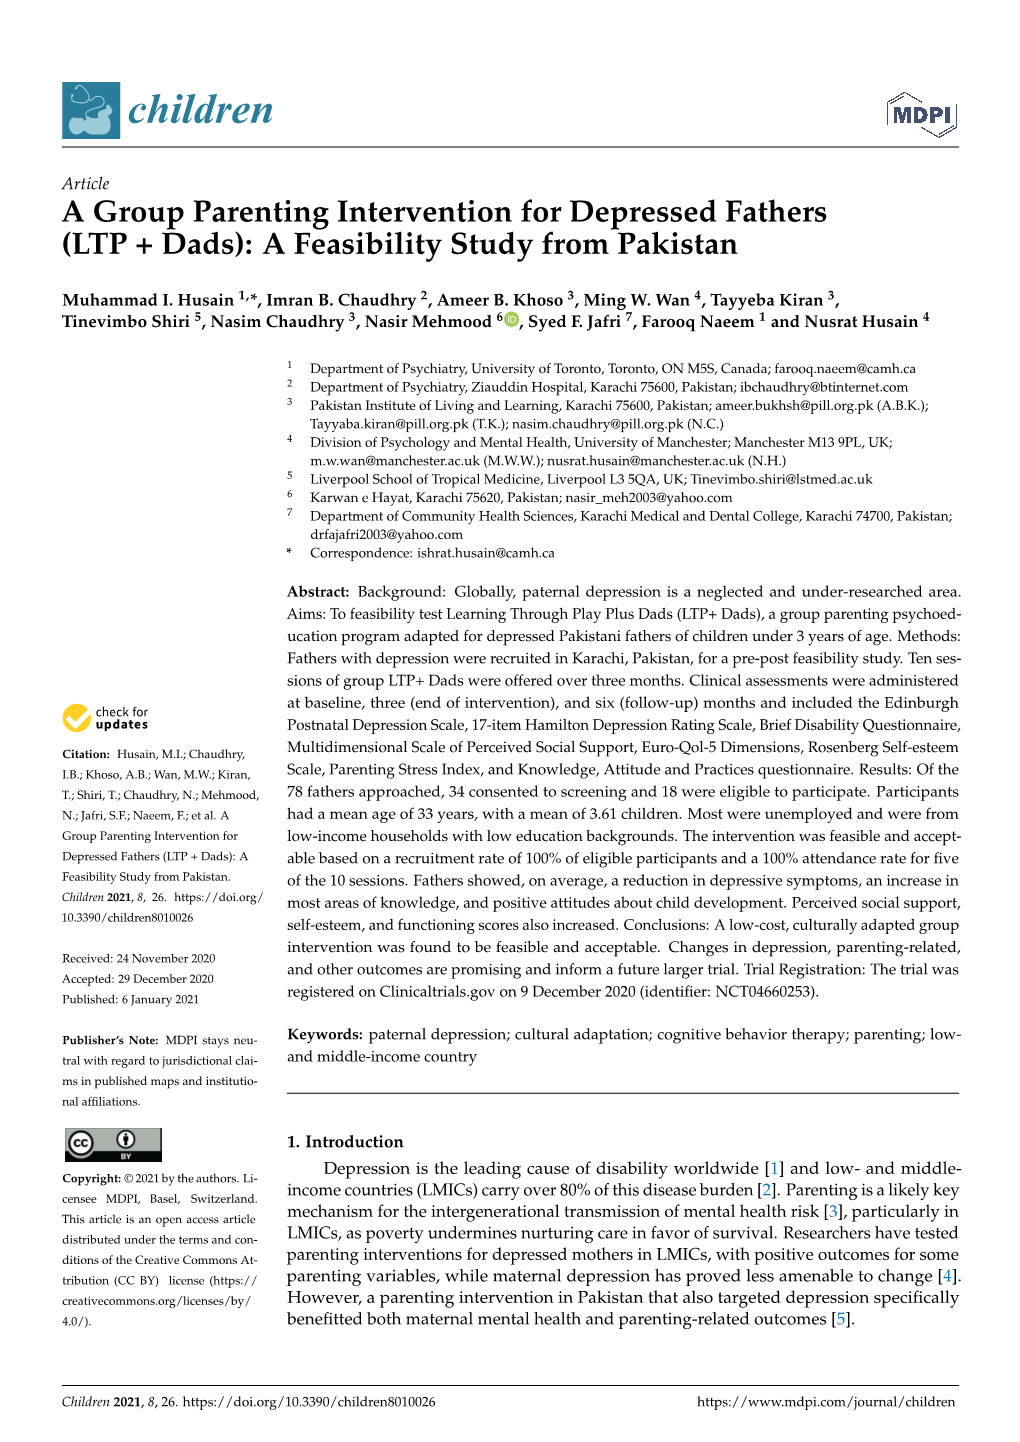 A Group Parenting Intervention for Depressed Fathers (LTP + Dads): a Feasibility Study from Pakistan